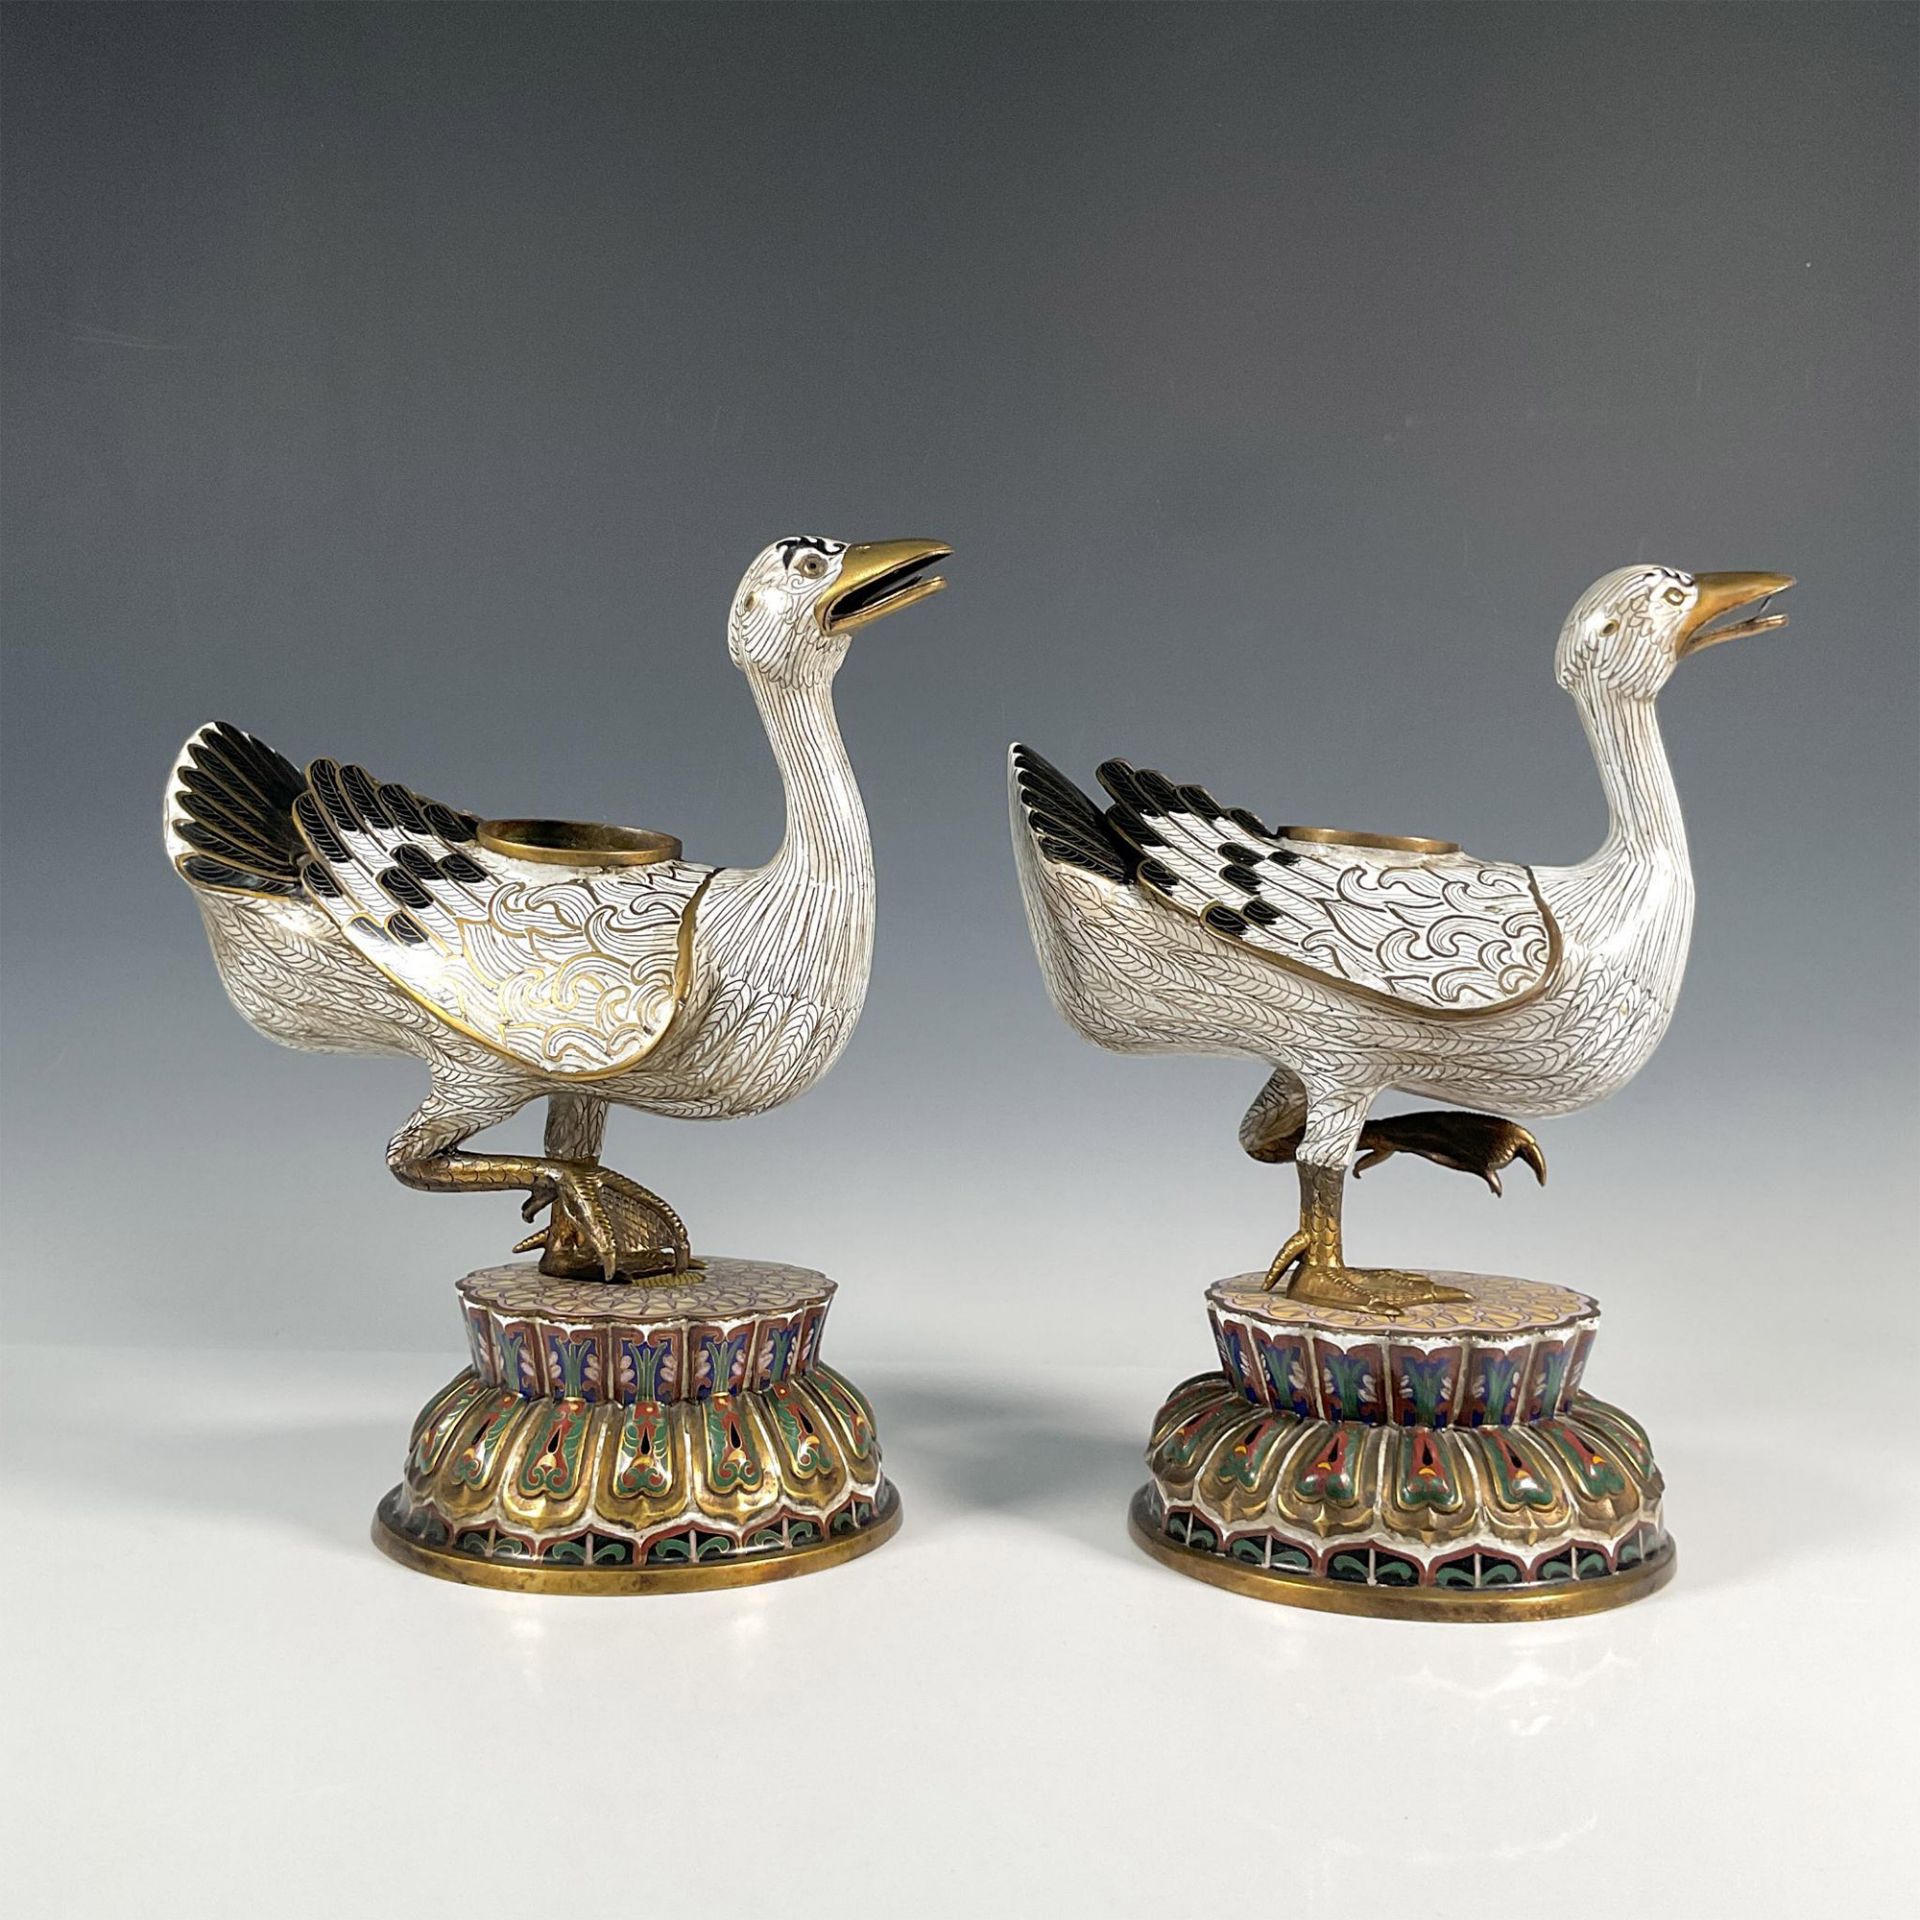 Pair of Chinese Cloisonne Duck Censers - Image 5 of 11